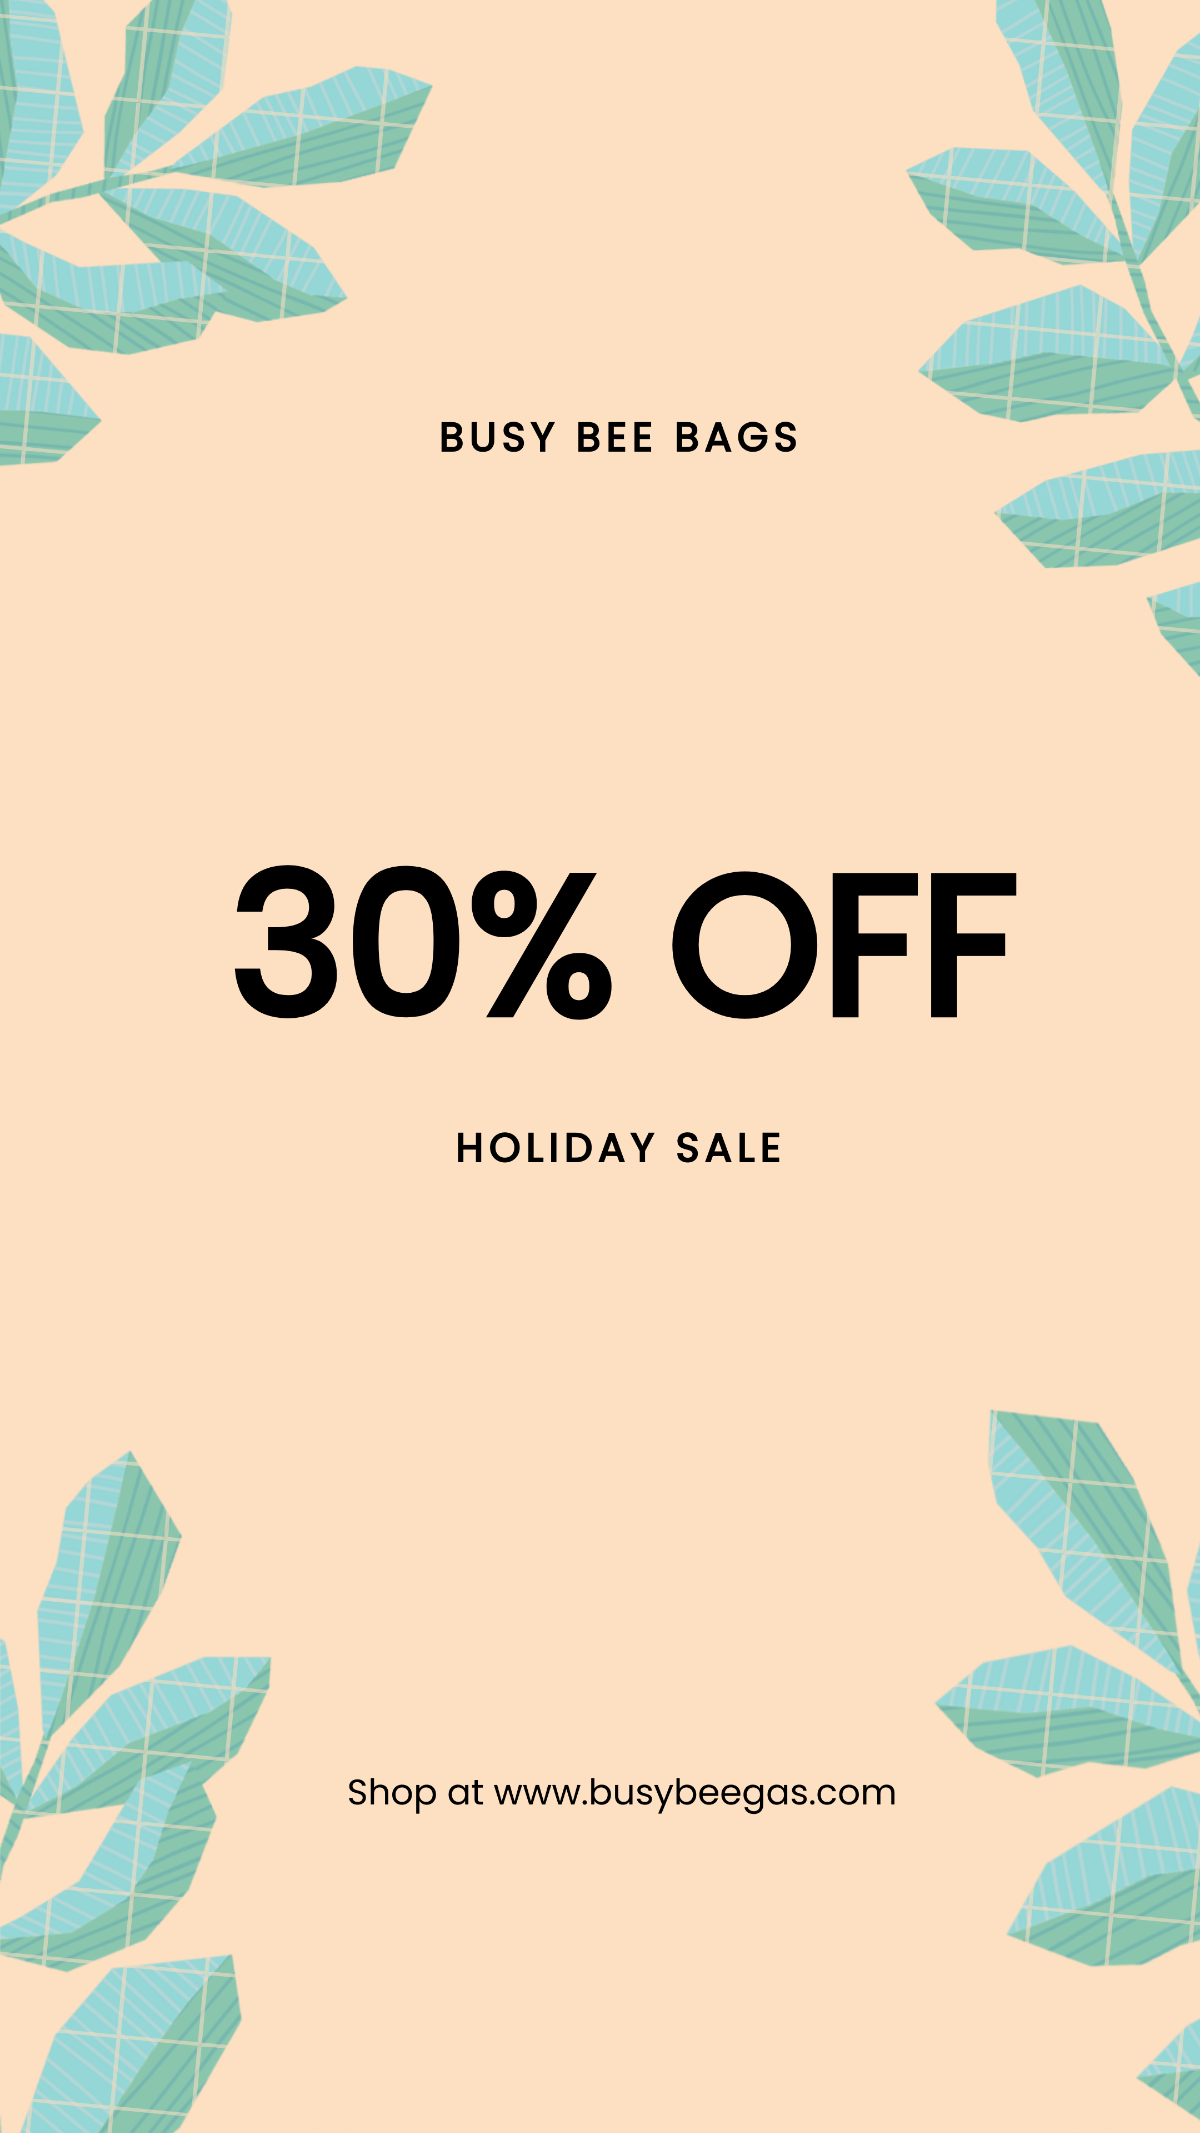 30% Off Holiday Sale Whatsapp Image Template